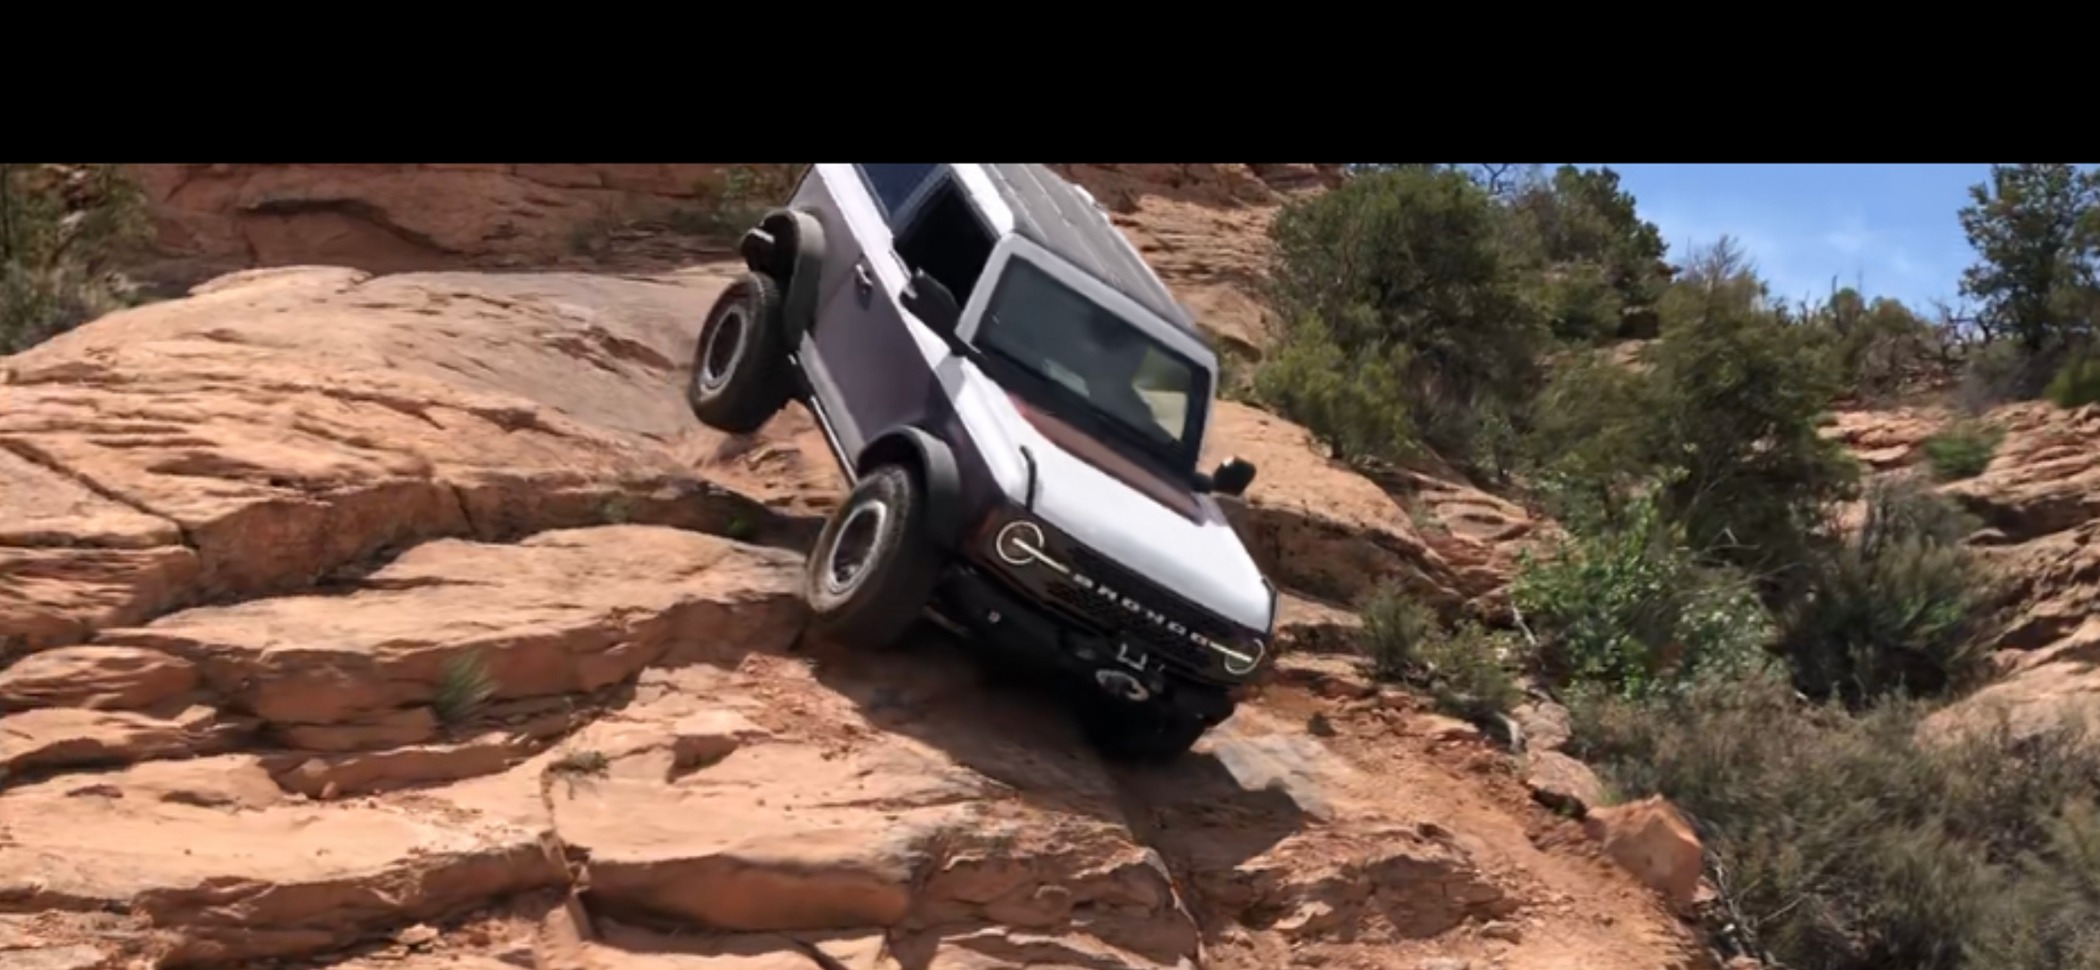 Ford Bronco Care to Share Your Adventures or/and Memories? Photos and Videos are Appreciated Tipper